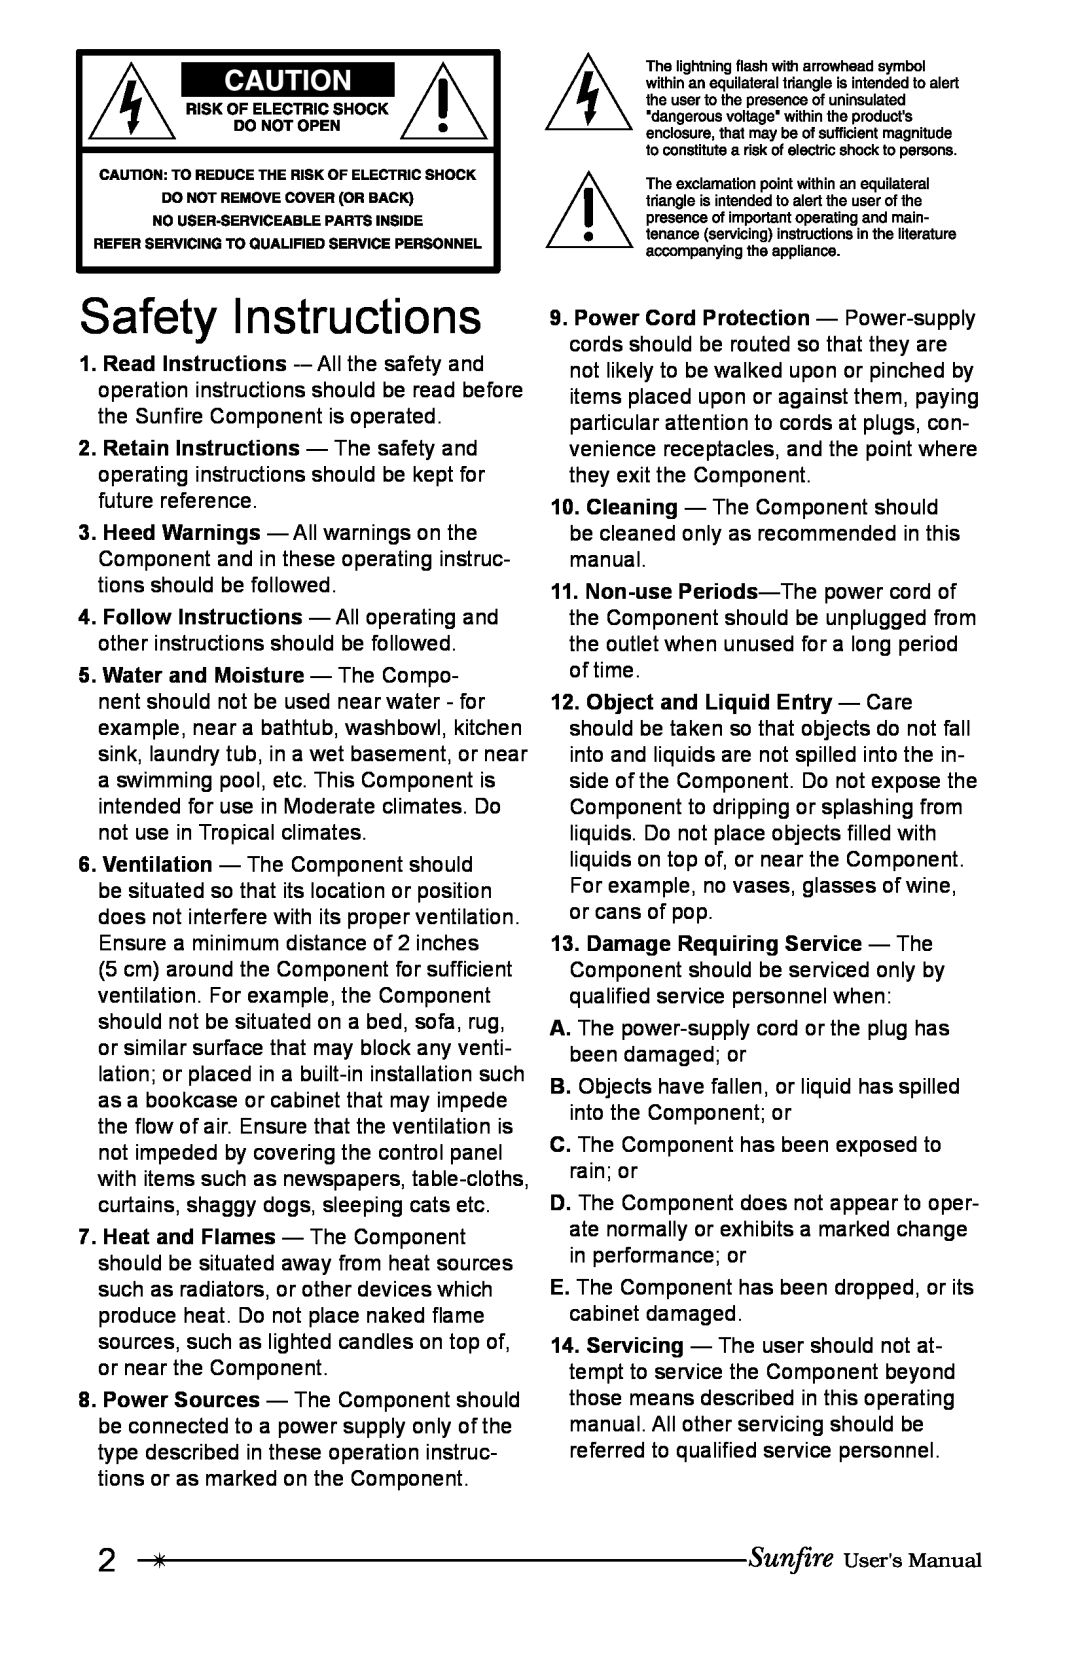 Sunfire 12 user manual Safety Instructions 